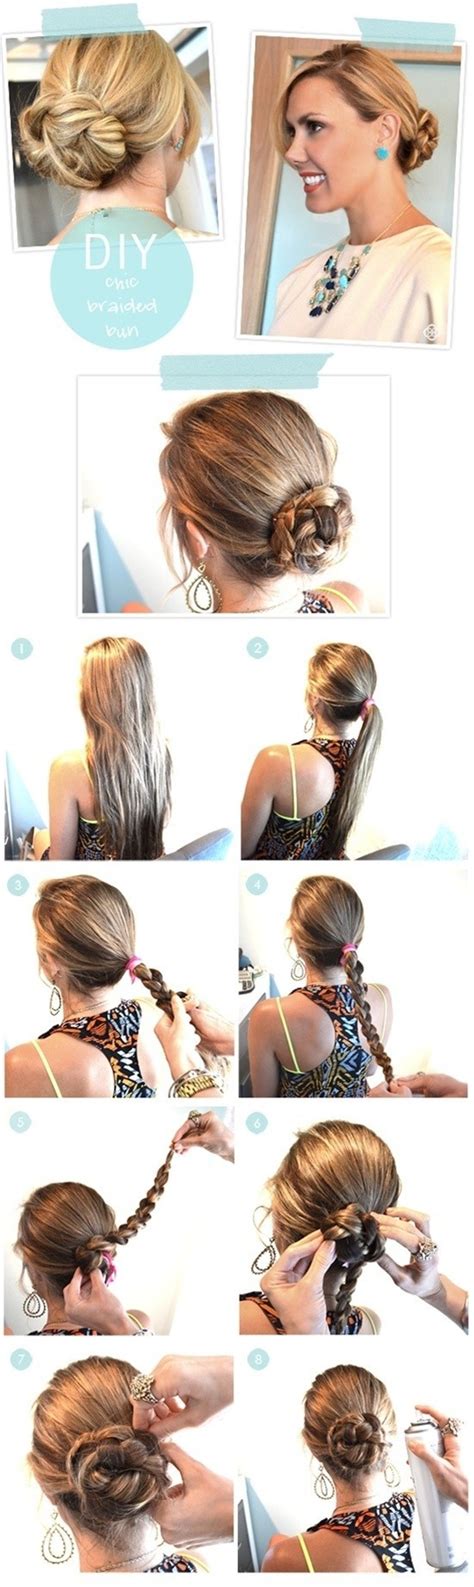 Long hairstyles are very much trendy if you can get the correct haircut and color. 15 Beautiful Long Hairstyles with Tutorials - Pretty Designs